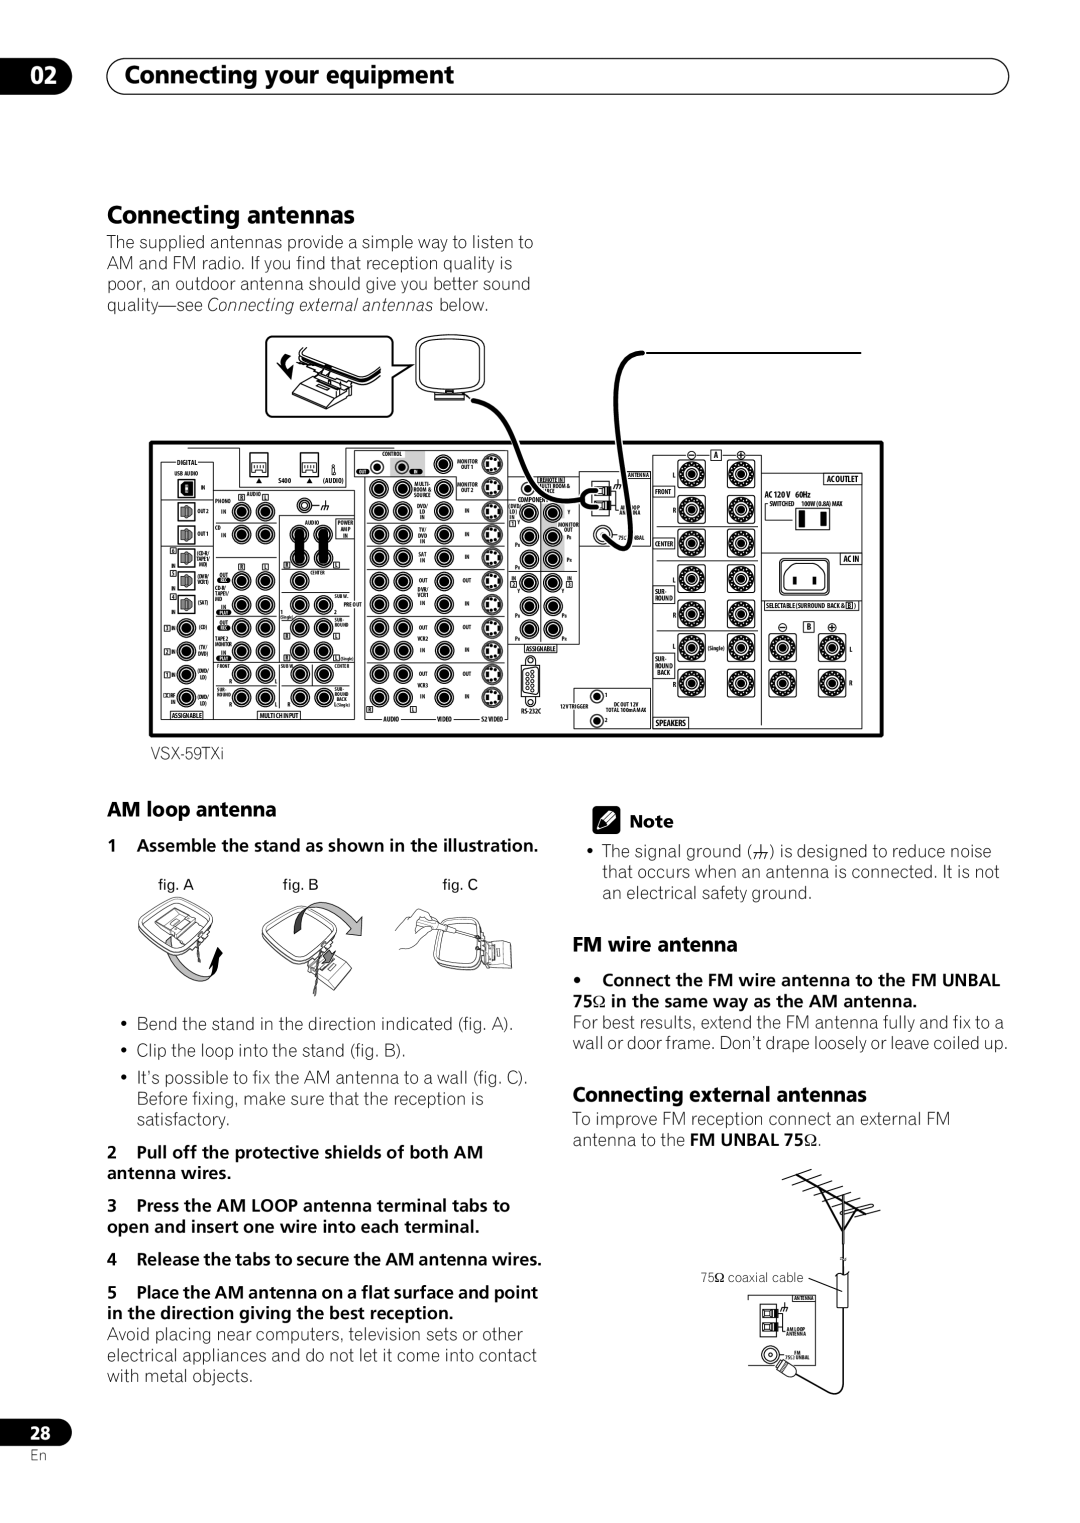 Pioneer VSX-59TXi operating instructions 02Connecting your equipment Connecting antennas, AM loop antenna, FM wire antenna 